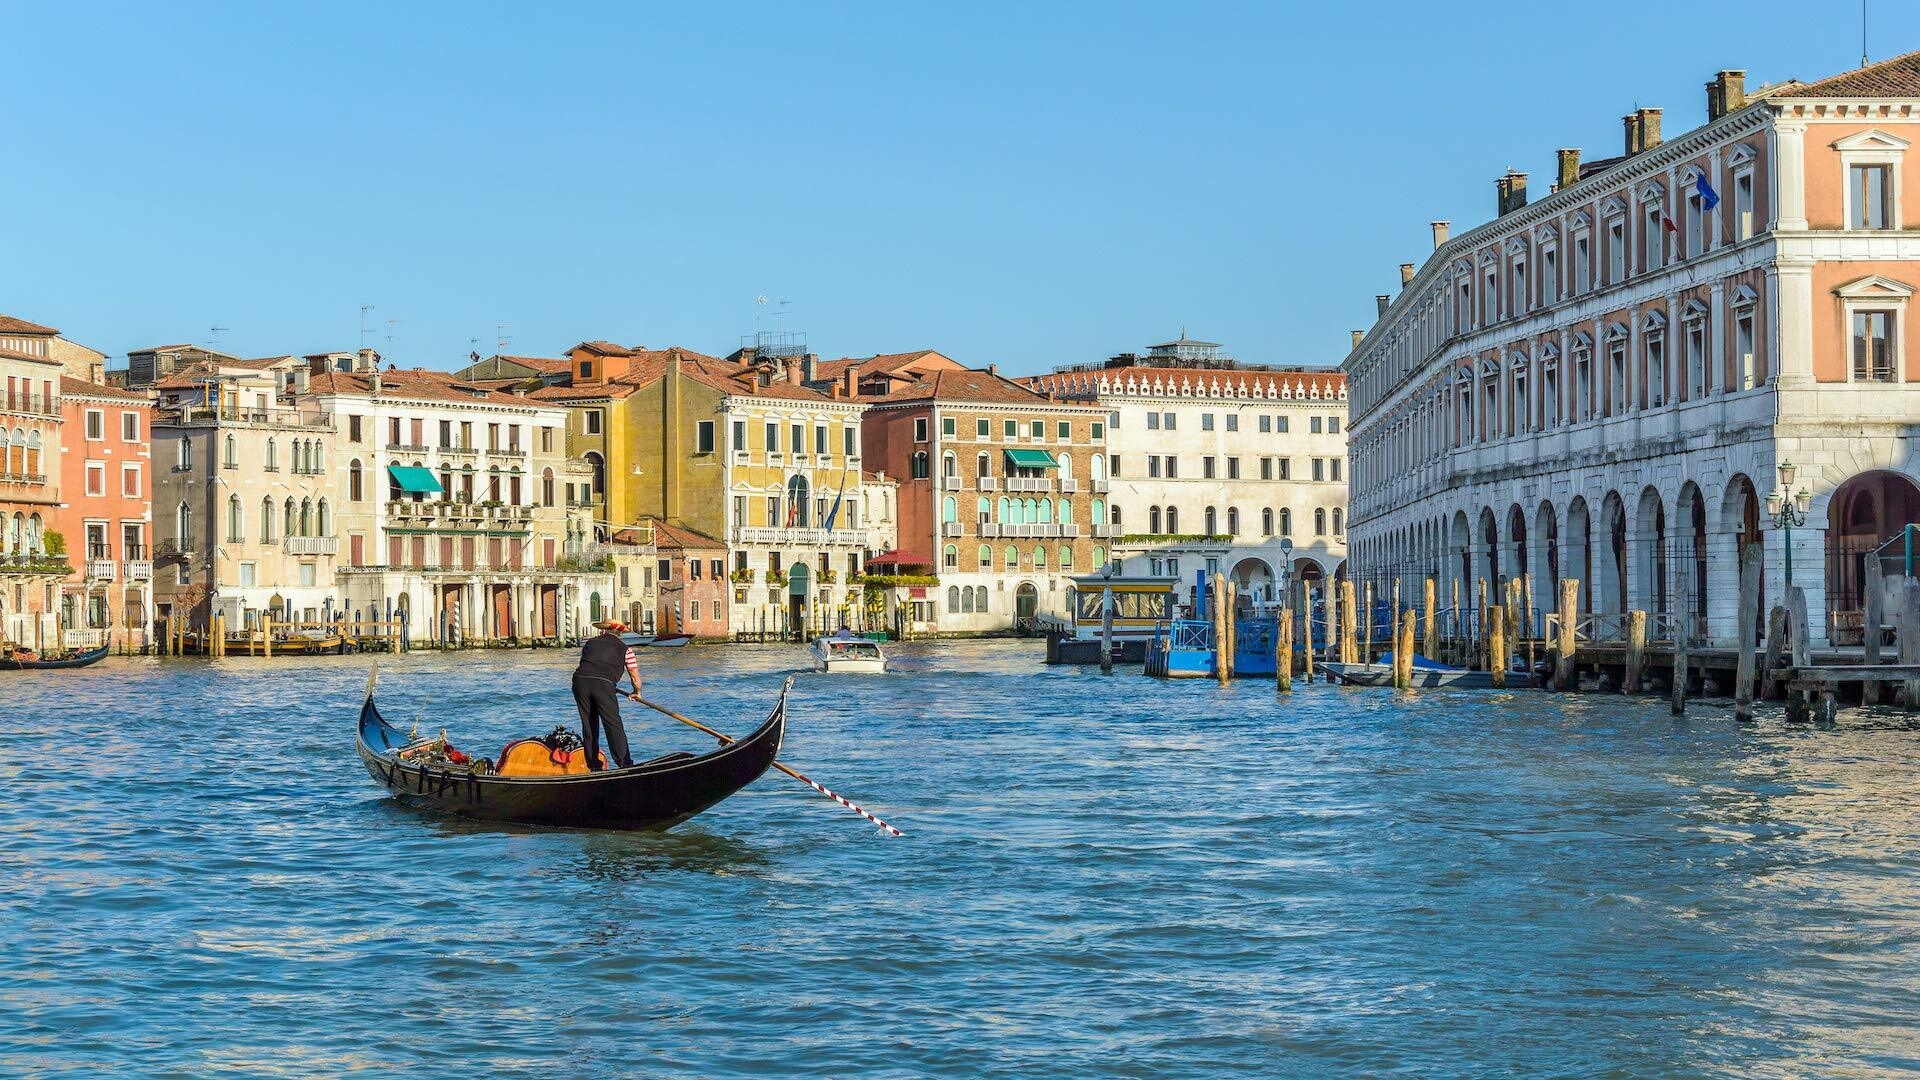 An image showing a large body of water with a person standing in a boat while rowing it. Buildings from an Italian city surround the water.